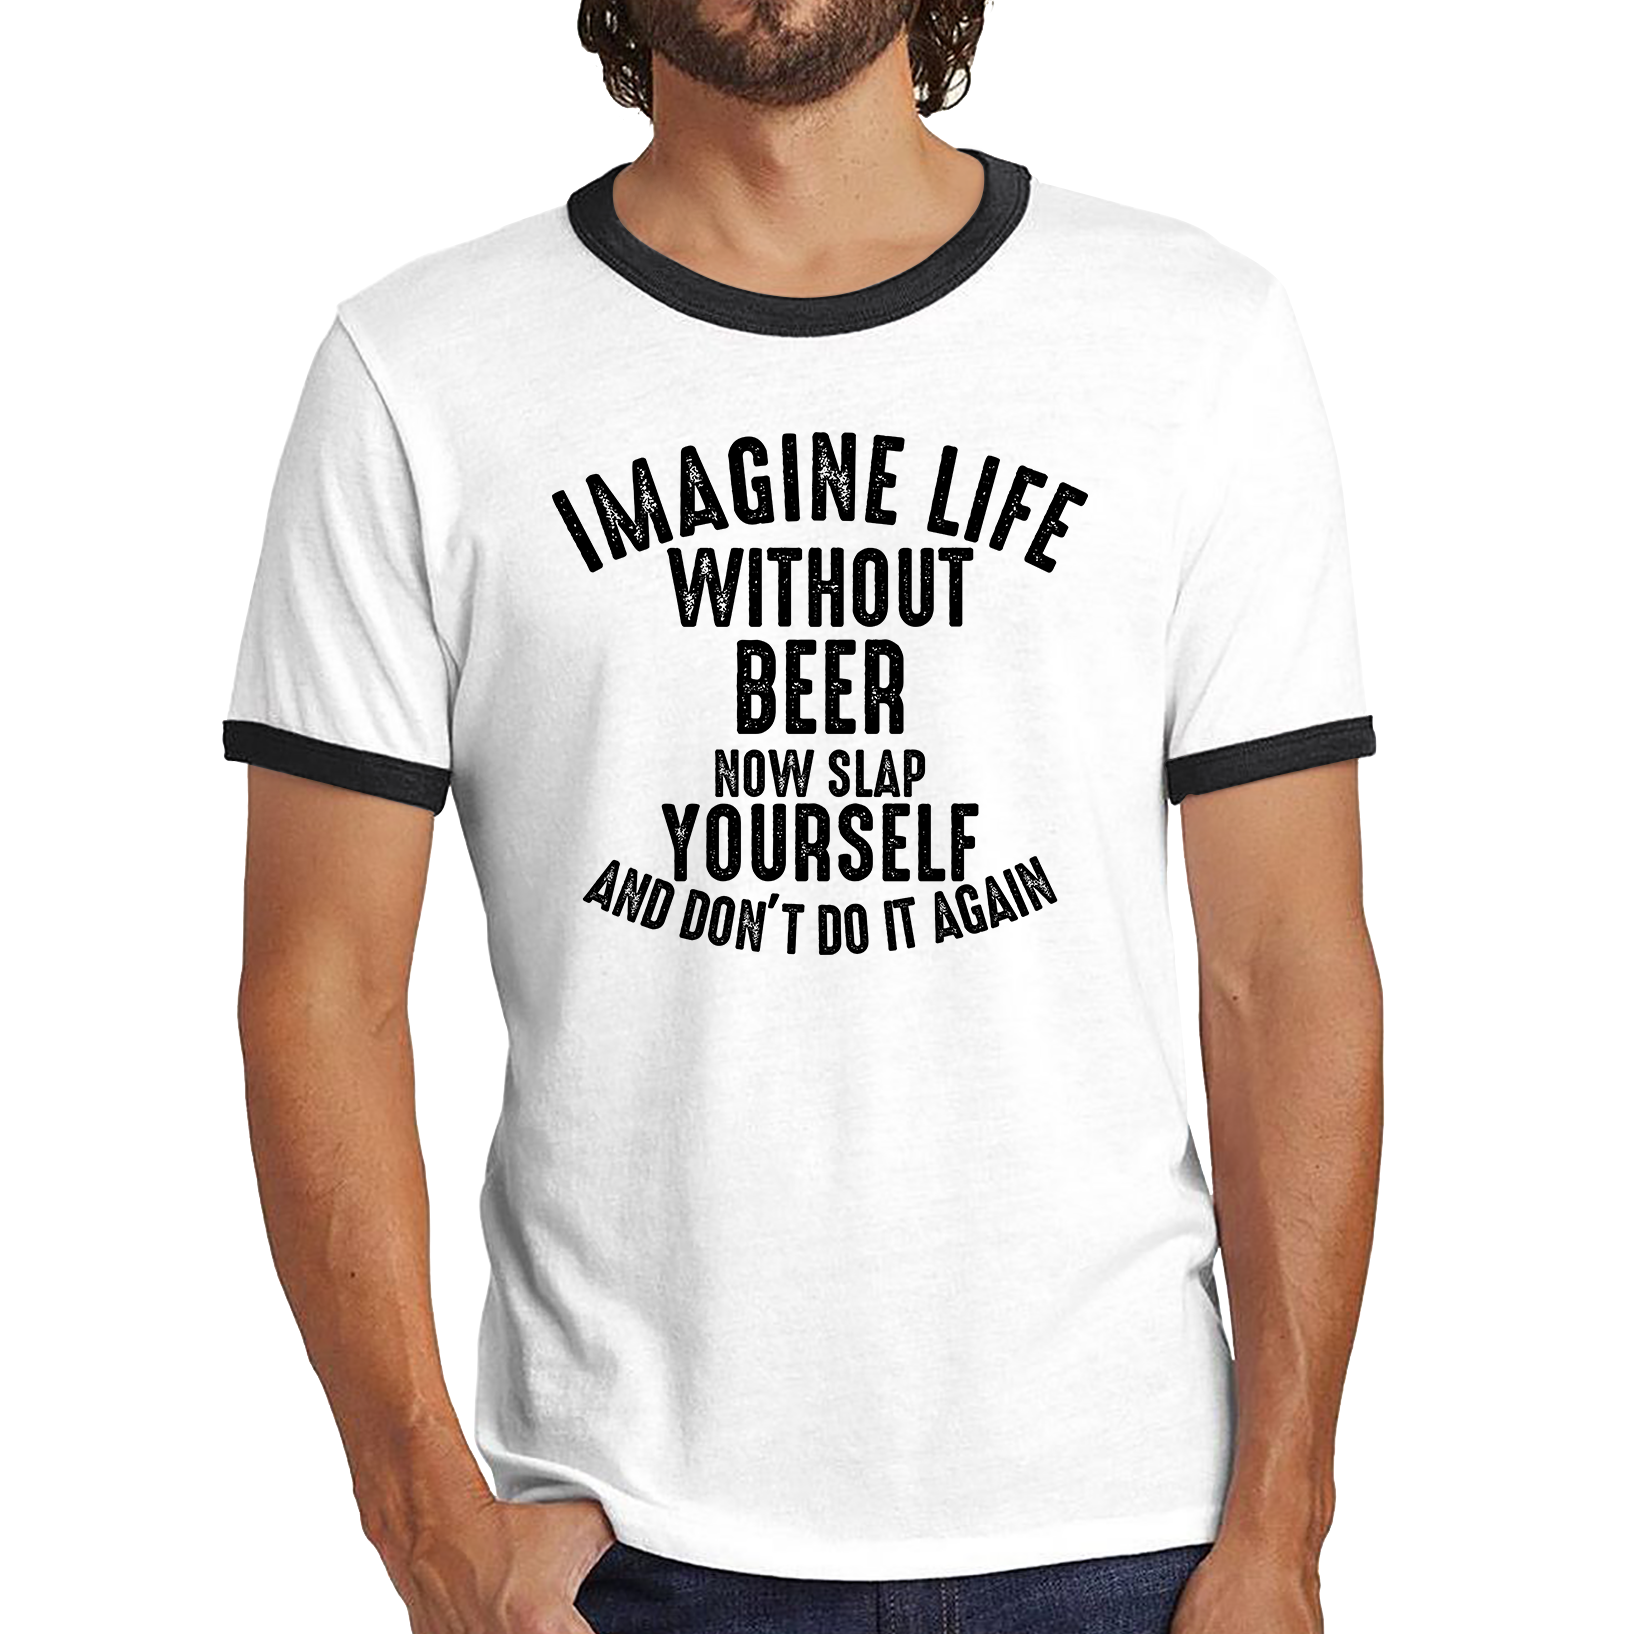 Imagine Life Without Beer Now Slap Yourself And Don' Do It Again Shirt Drink Lovers Beer Drinking Ringer T Shirt